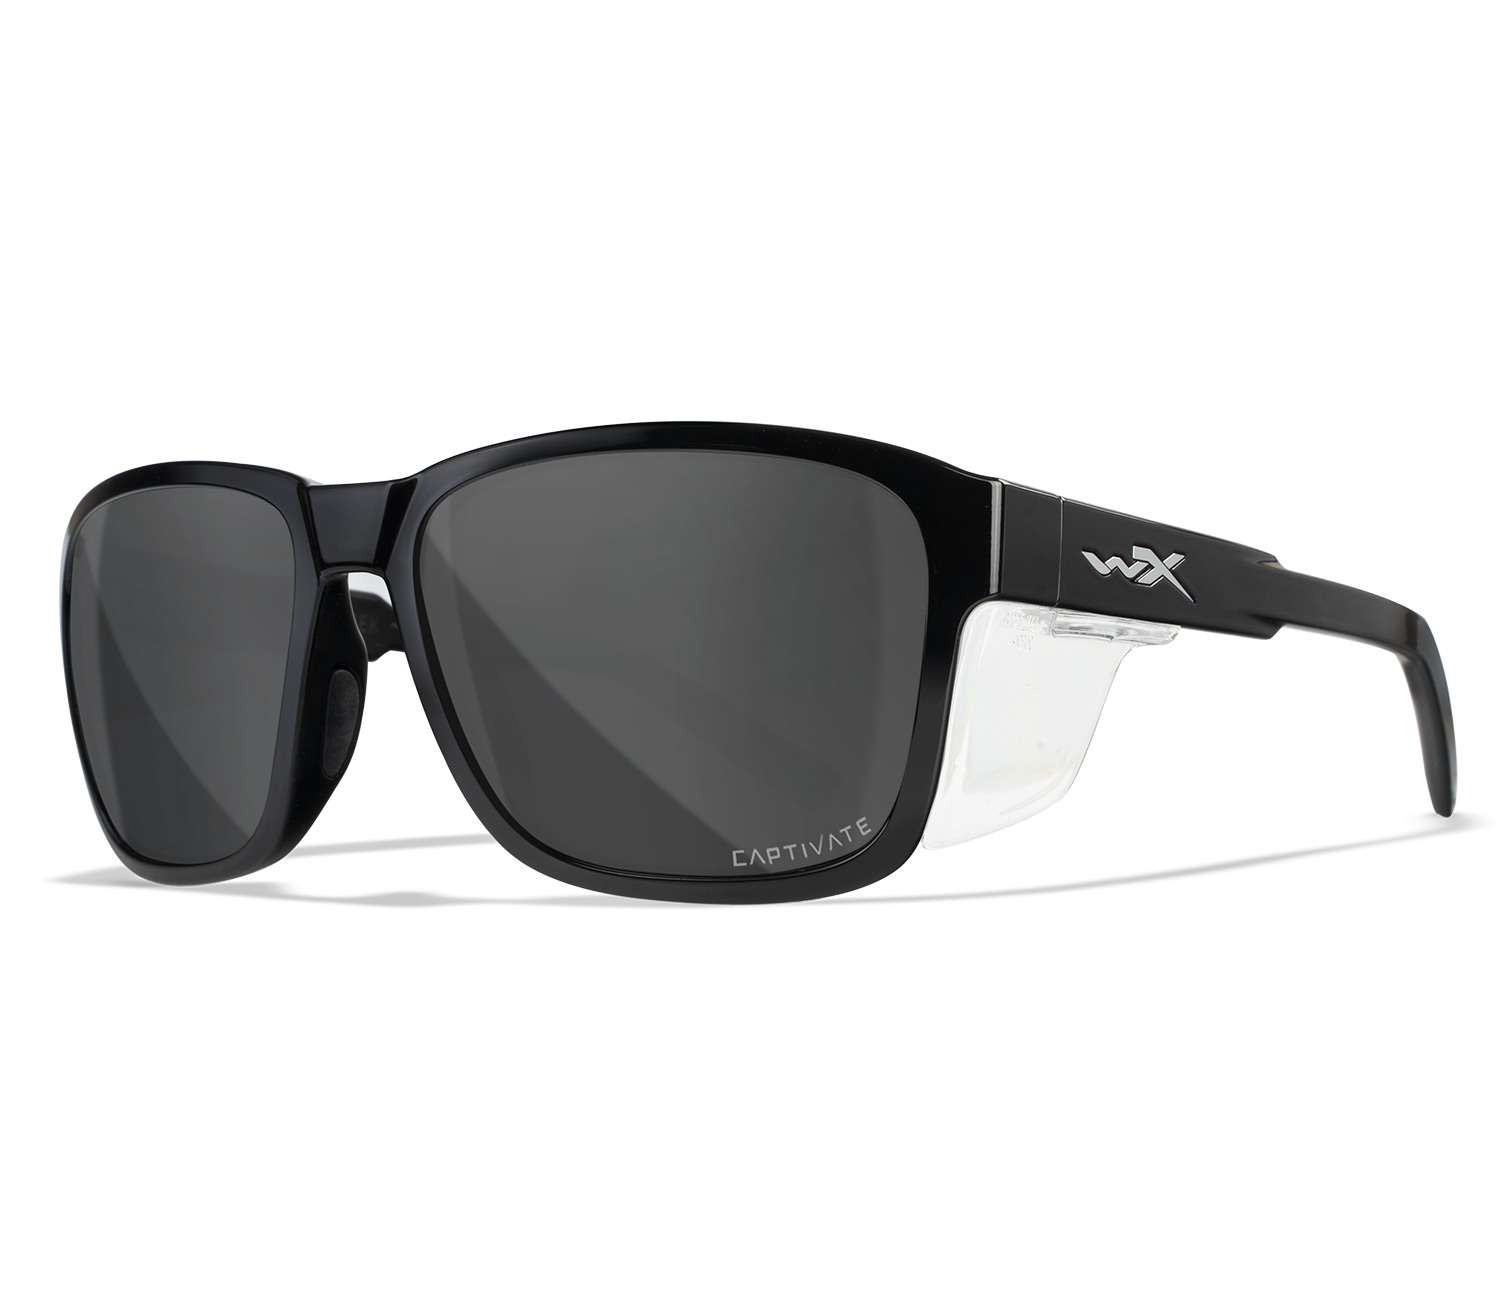 Gafas Wiley X Trek Captivate protectores laterales